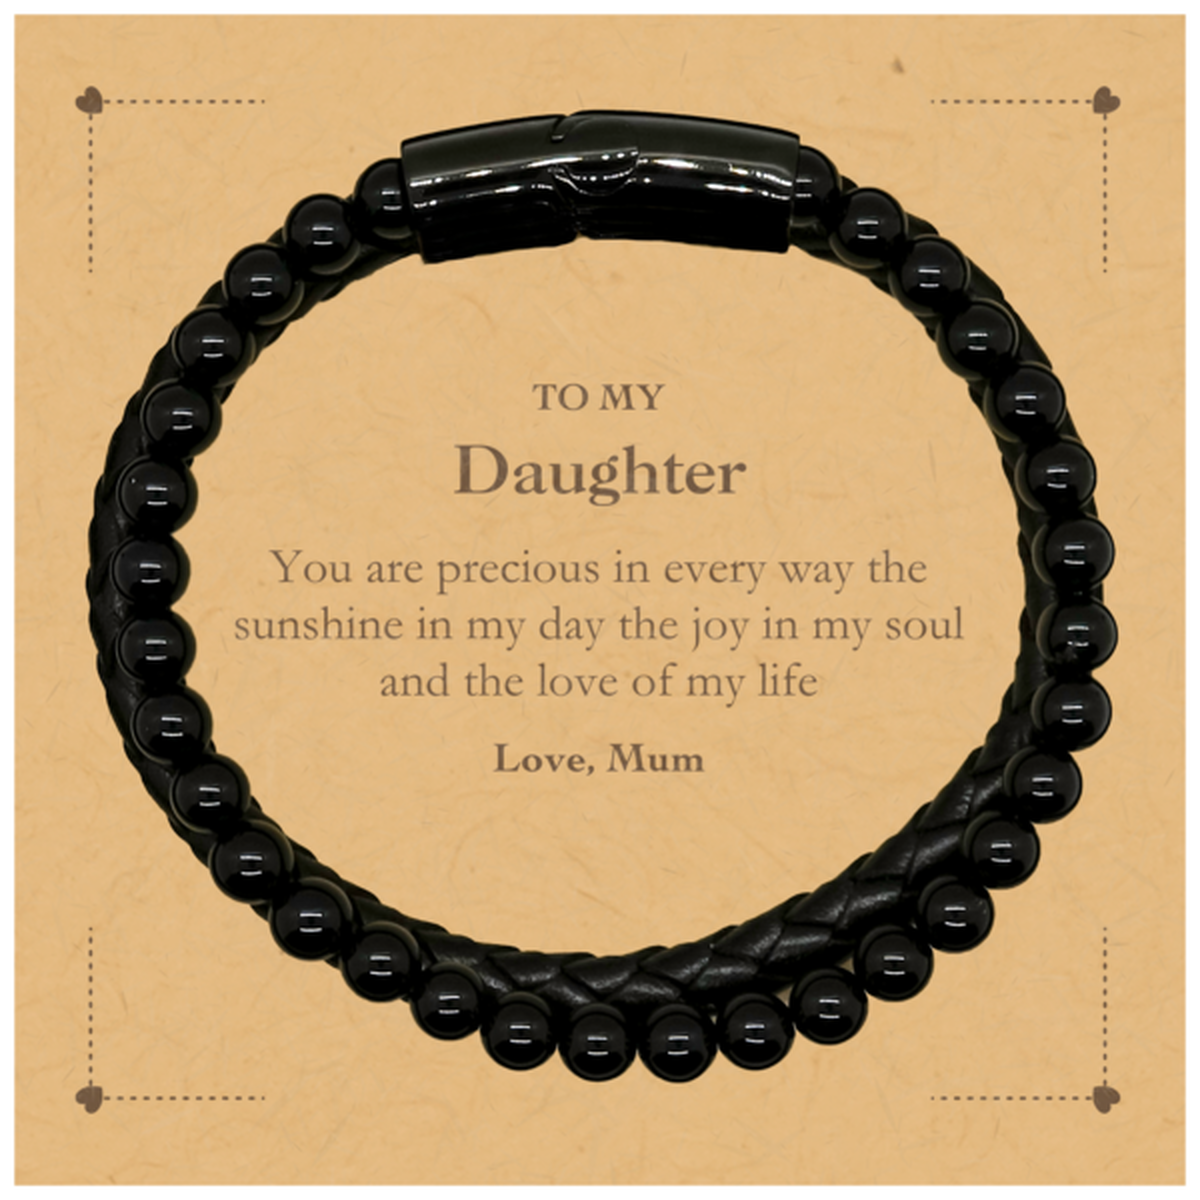 Graduation Gifts for Daughter Stone Leather Bracelets Present from Mum, Christmas Daughter Birthday Gifts Daughter You are precious in every way the sunshine in my day. Love, Mum